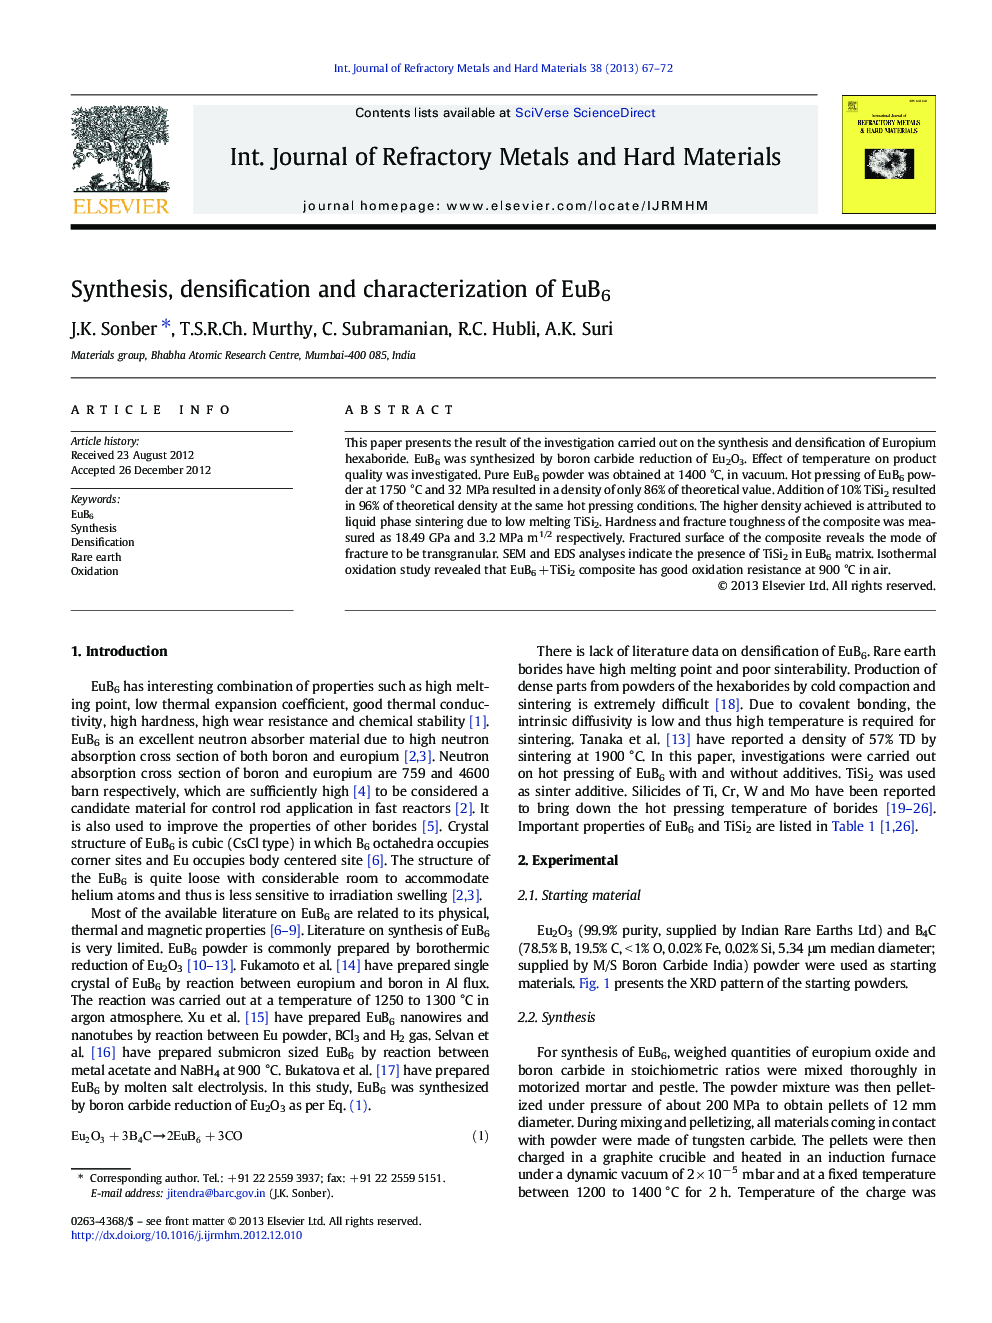 Synthesis, densification and characterization of EuB6